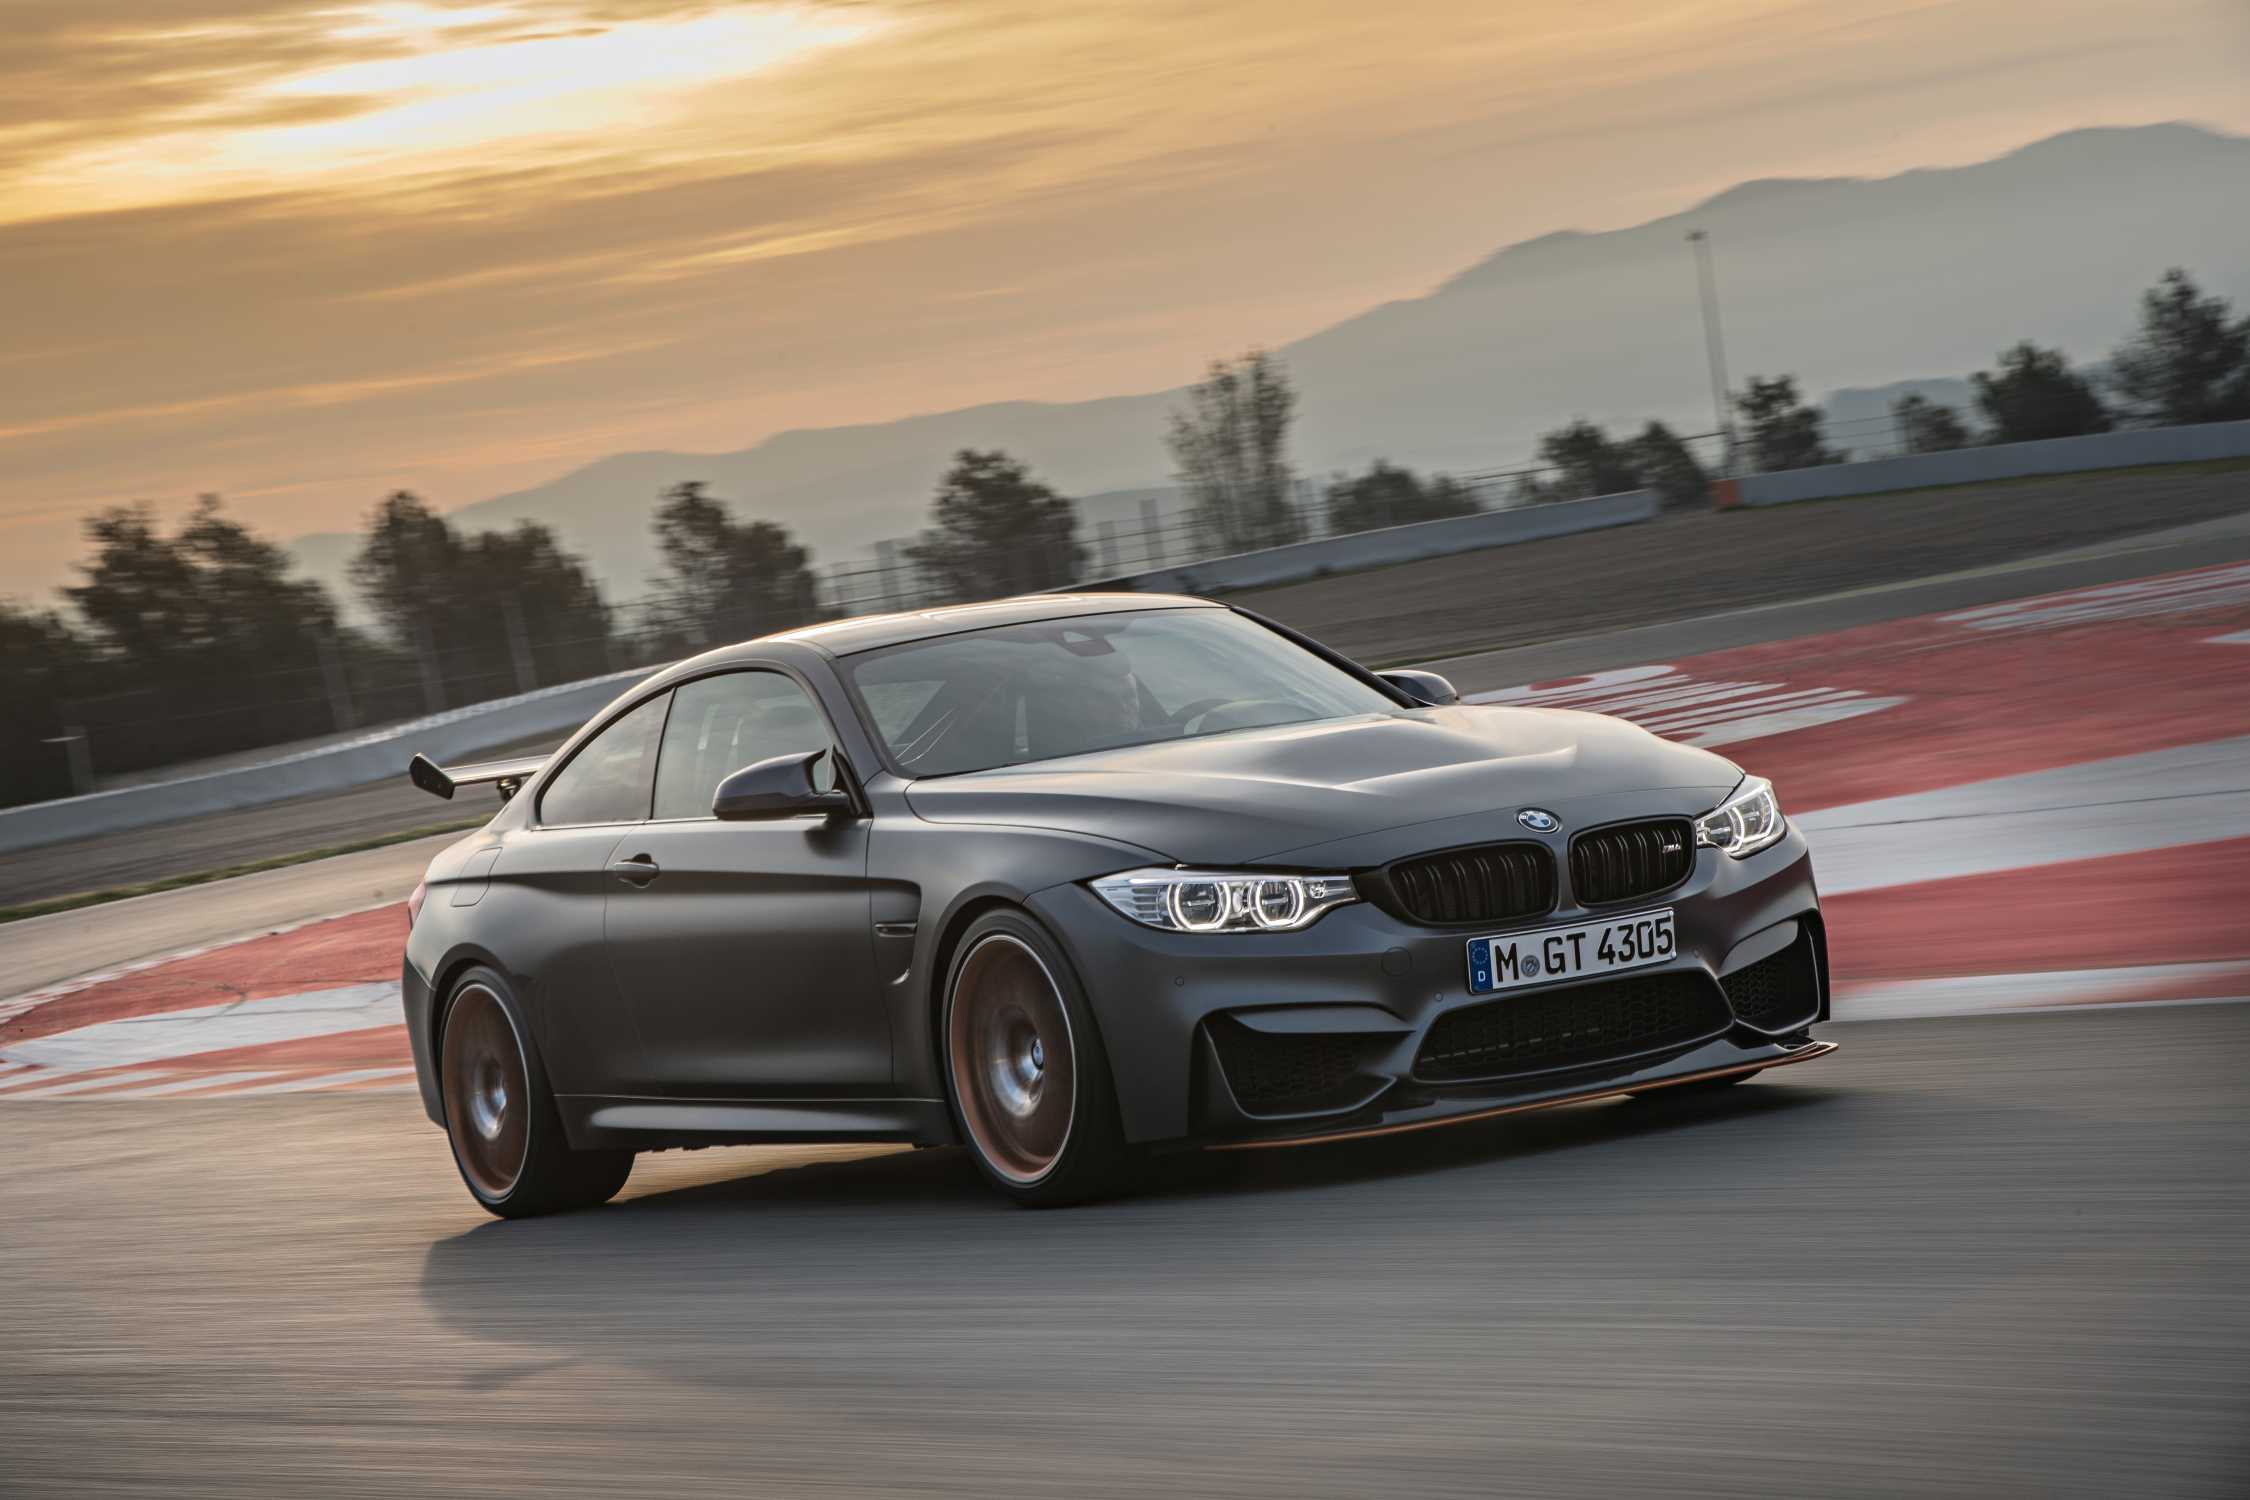 The new BMW M4 GTS